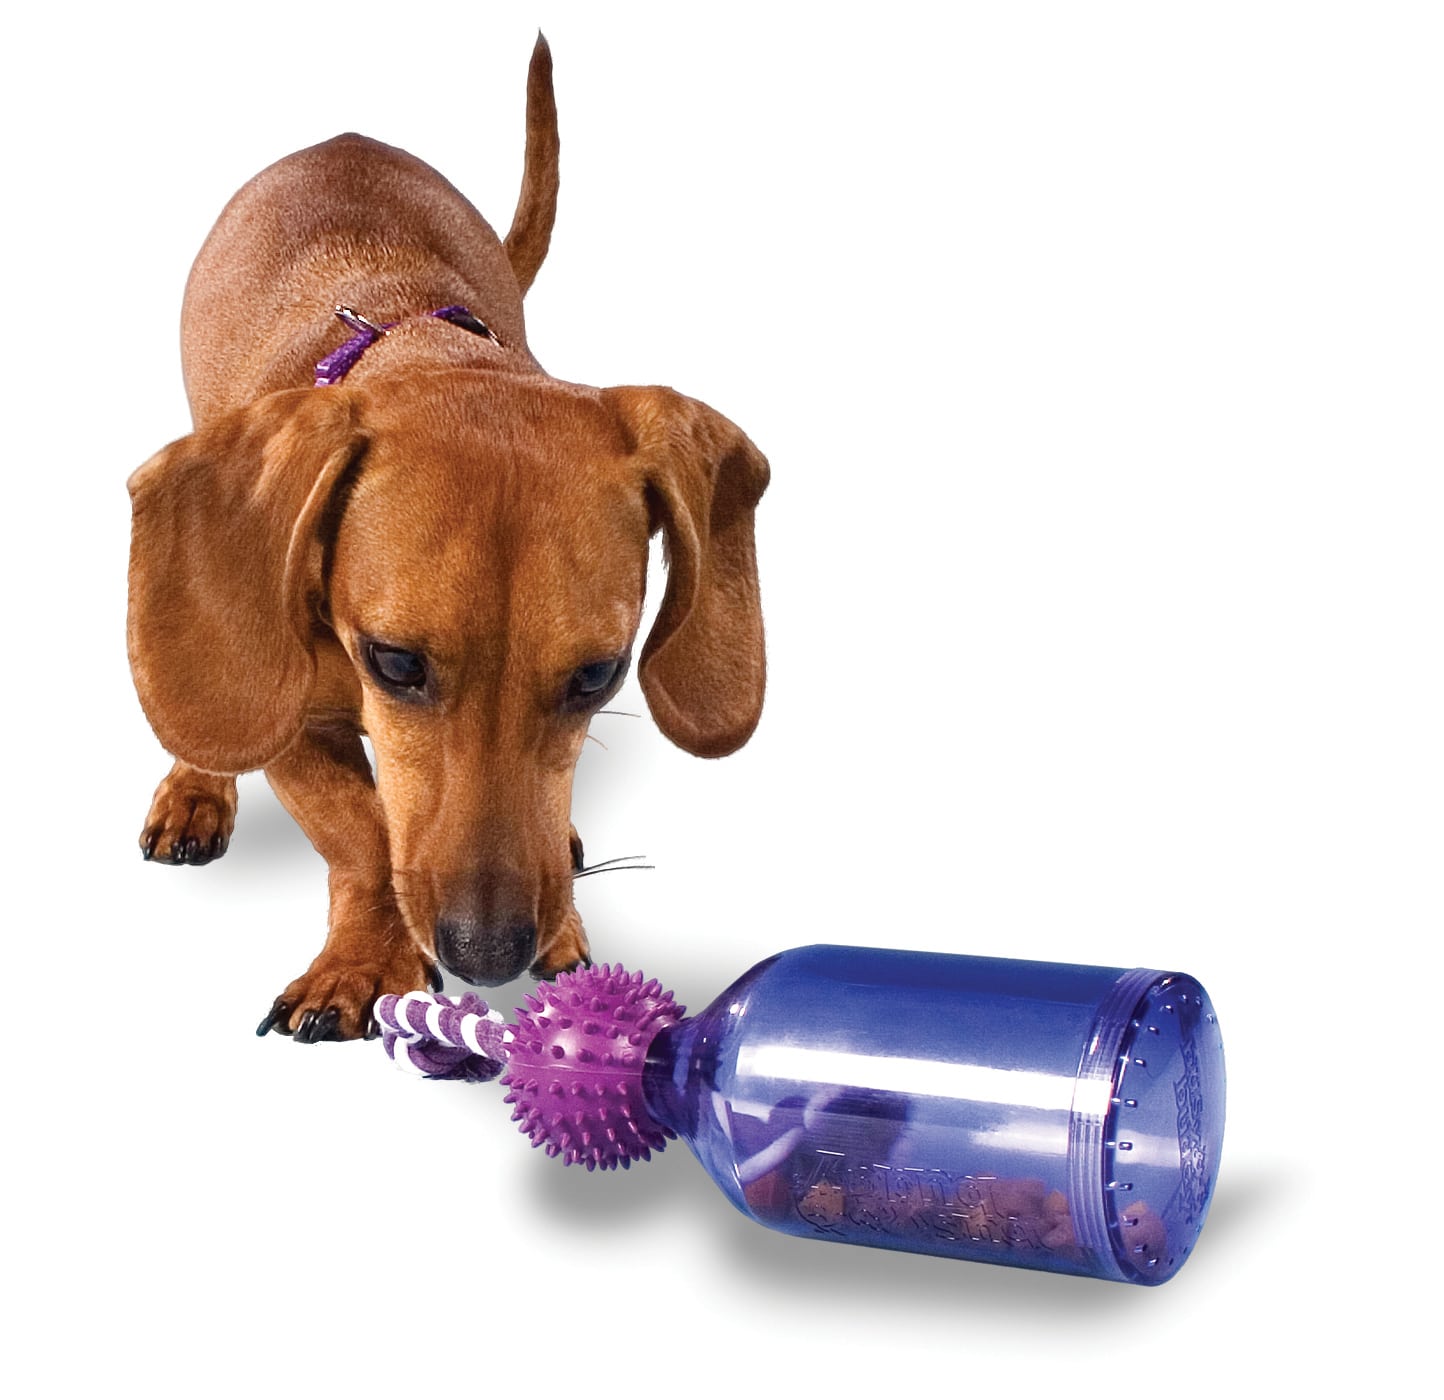 https://www.onesmileymonkey.com/wp-content/uploads/2019/01/3-Must-Have-Toys-to-Keep-your-Dog-Busy2.jpg